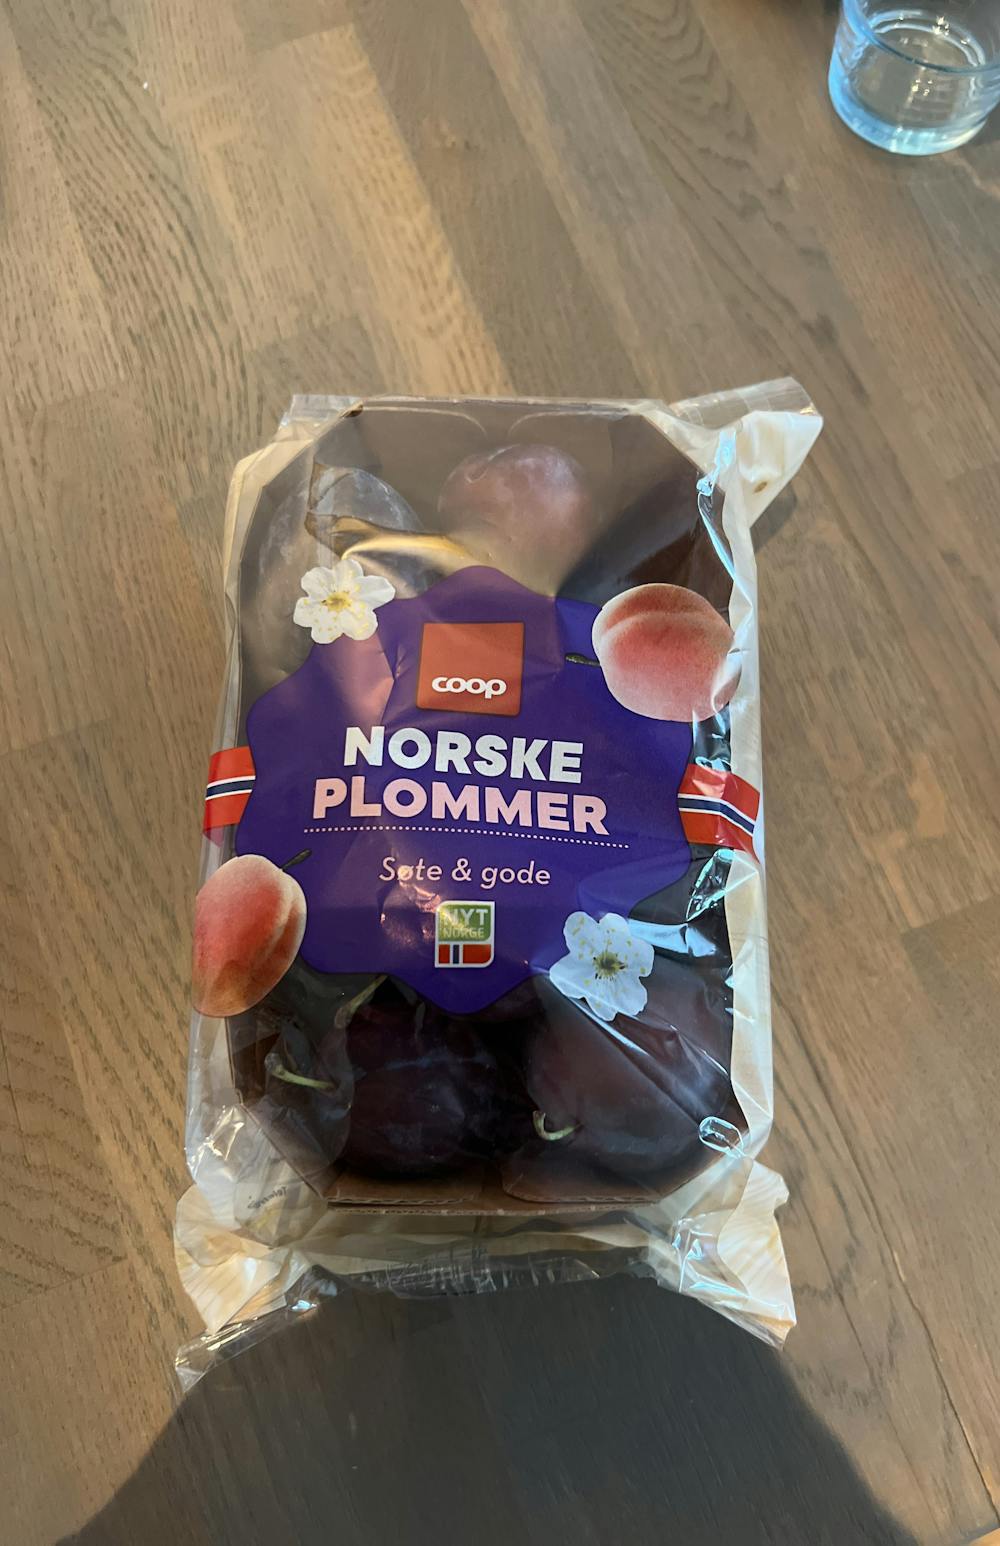 Norsk plomme, Coop